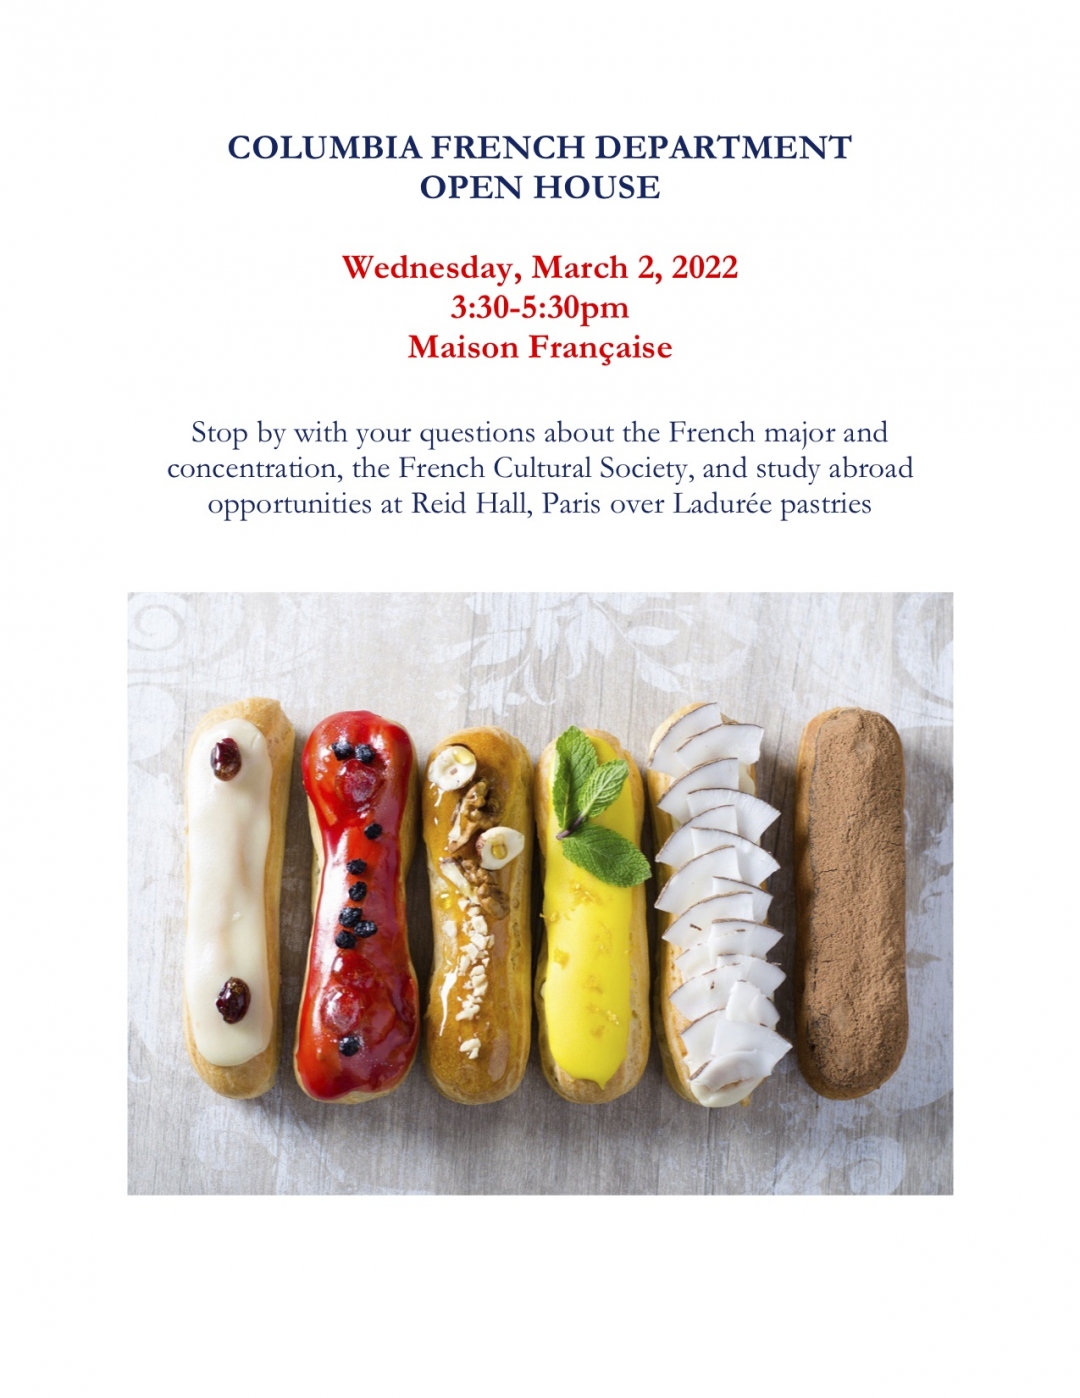 French Department Open House flyer